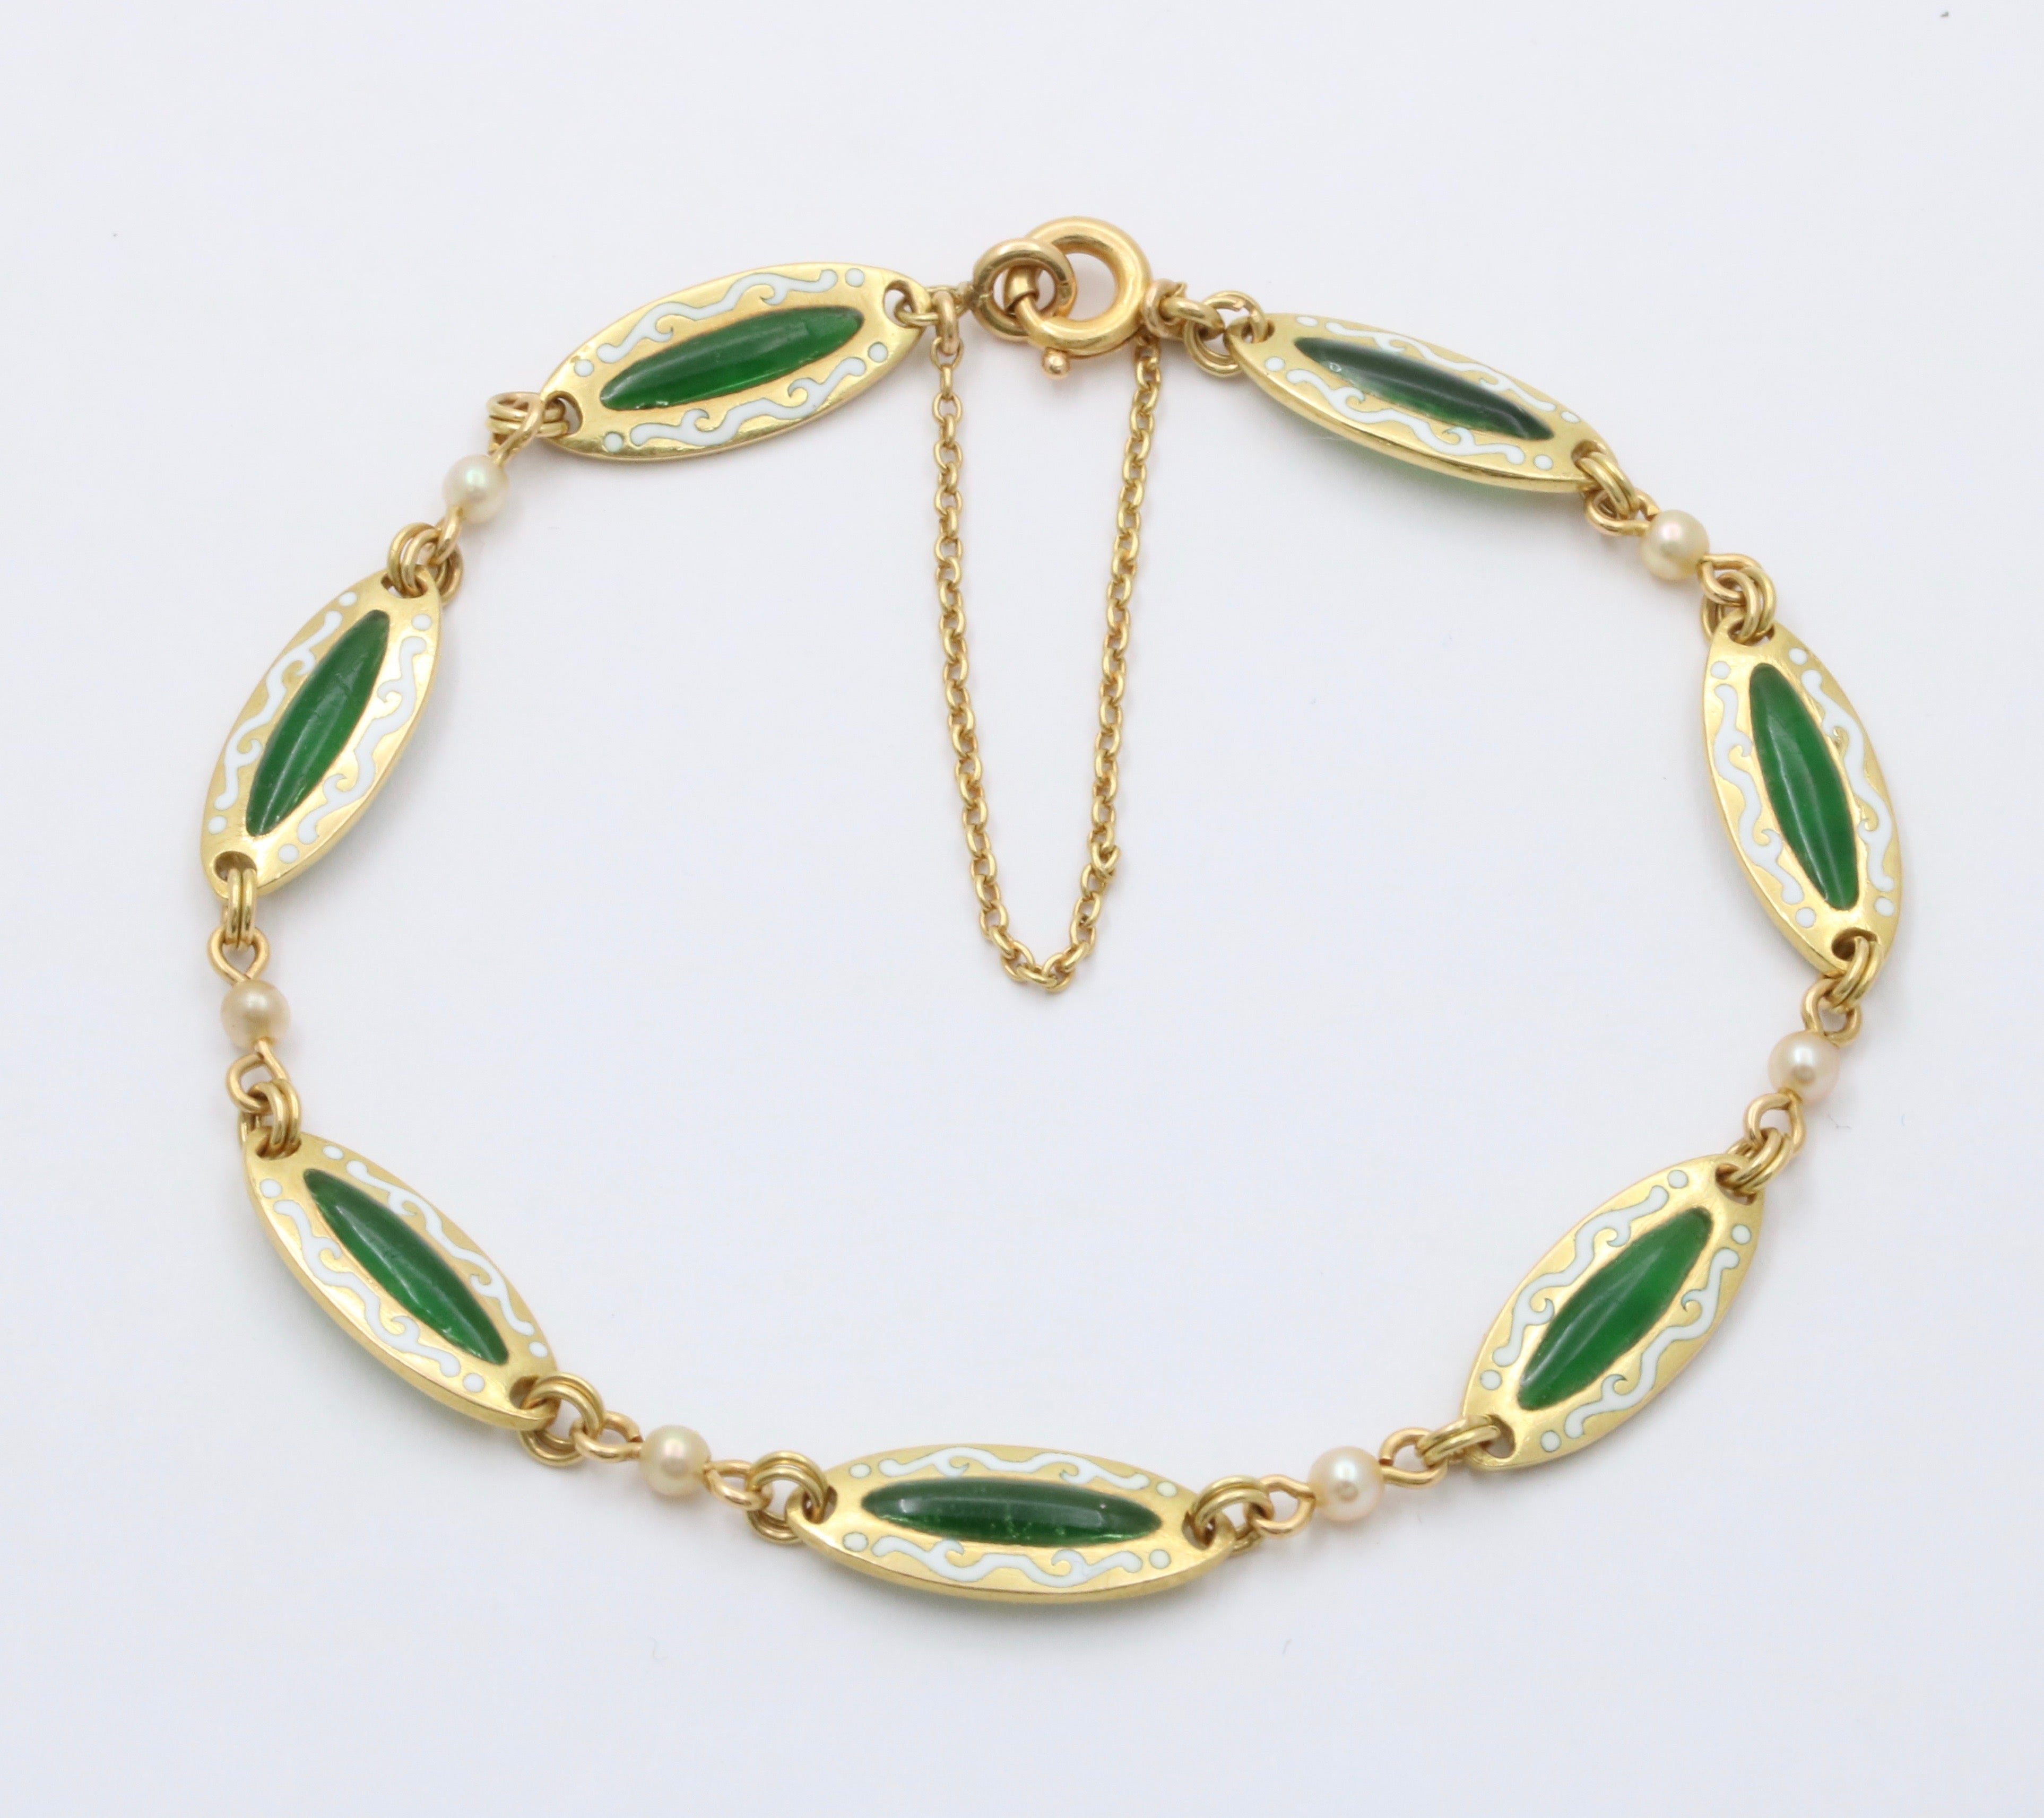 Buy Antique 18K Solid Gold 750 Outstanding Apple Green Jade Bangle Online  in India - Etsy